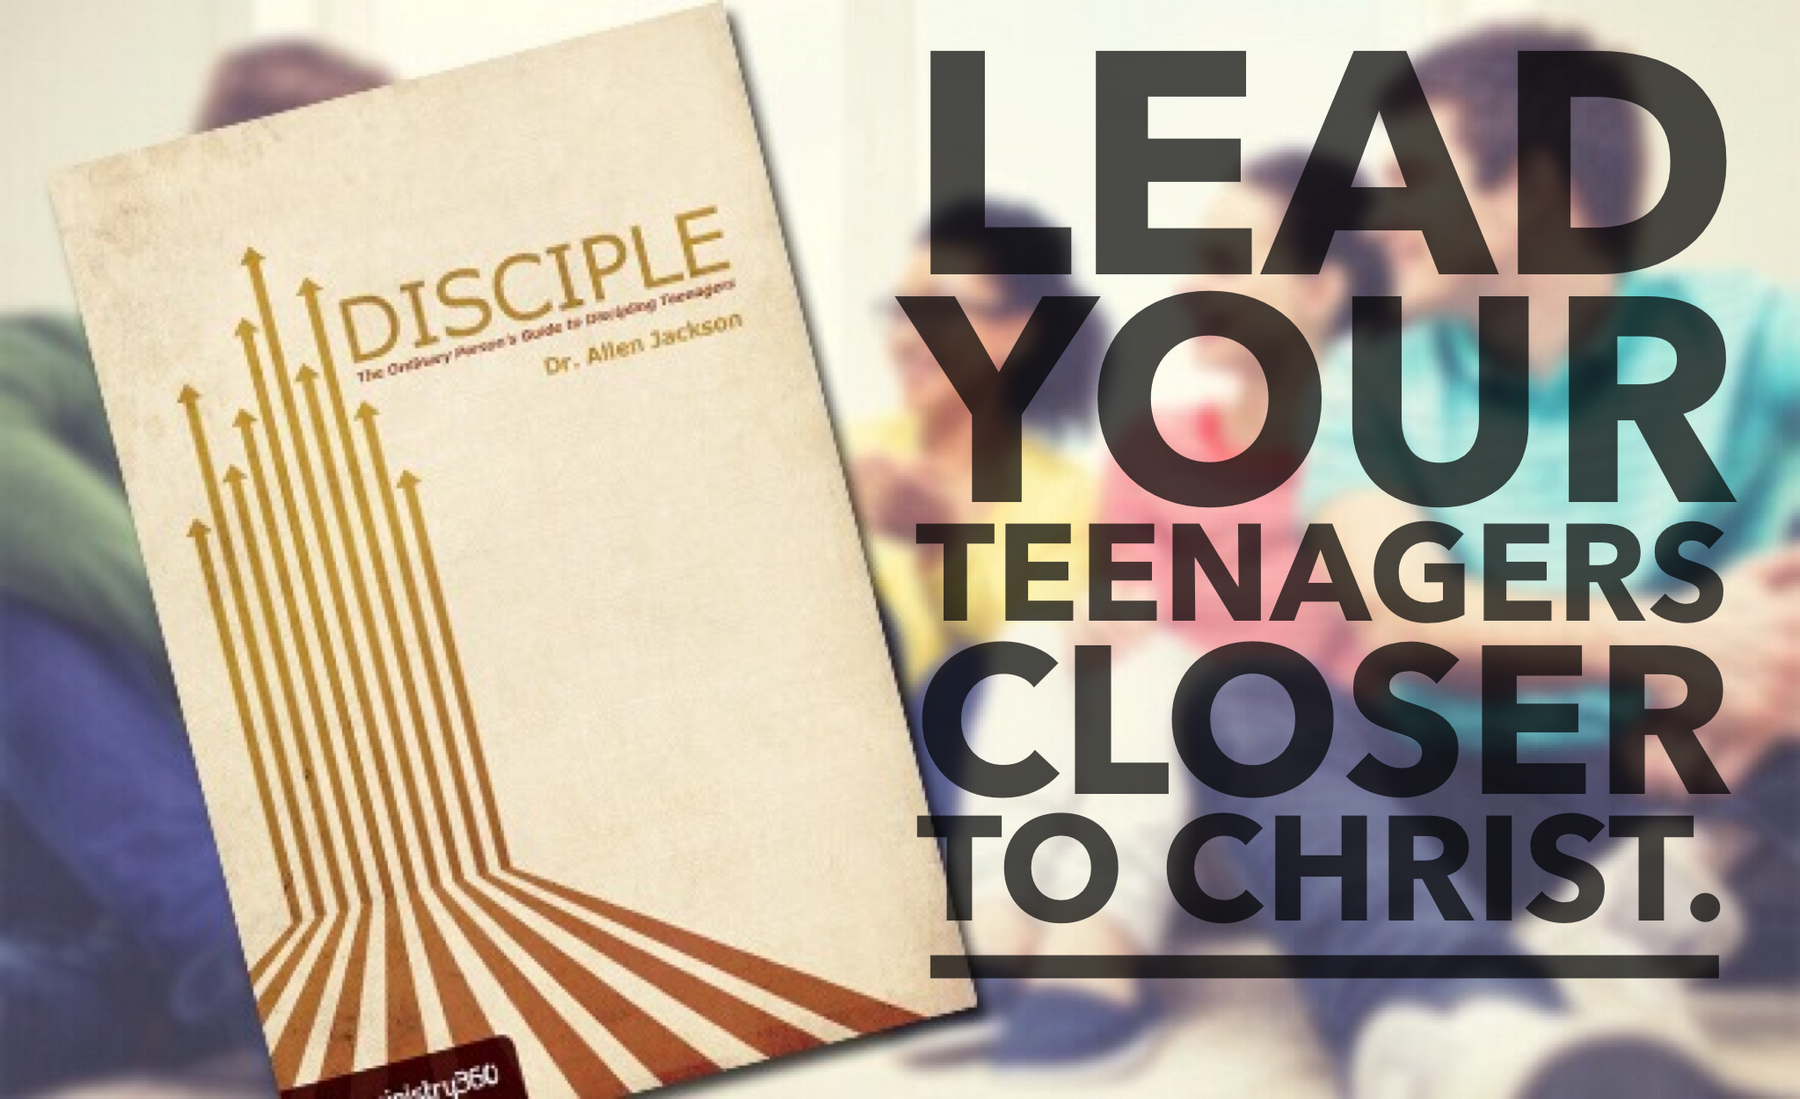 Introducing "Disciple: The Ordinary Person's Guide To Discipling Teenagers" by Dr. Allen Jackson